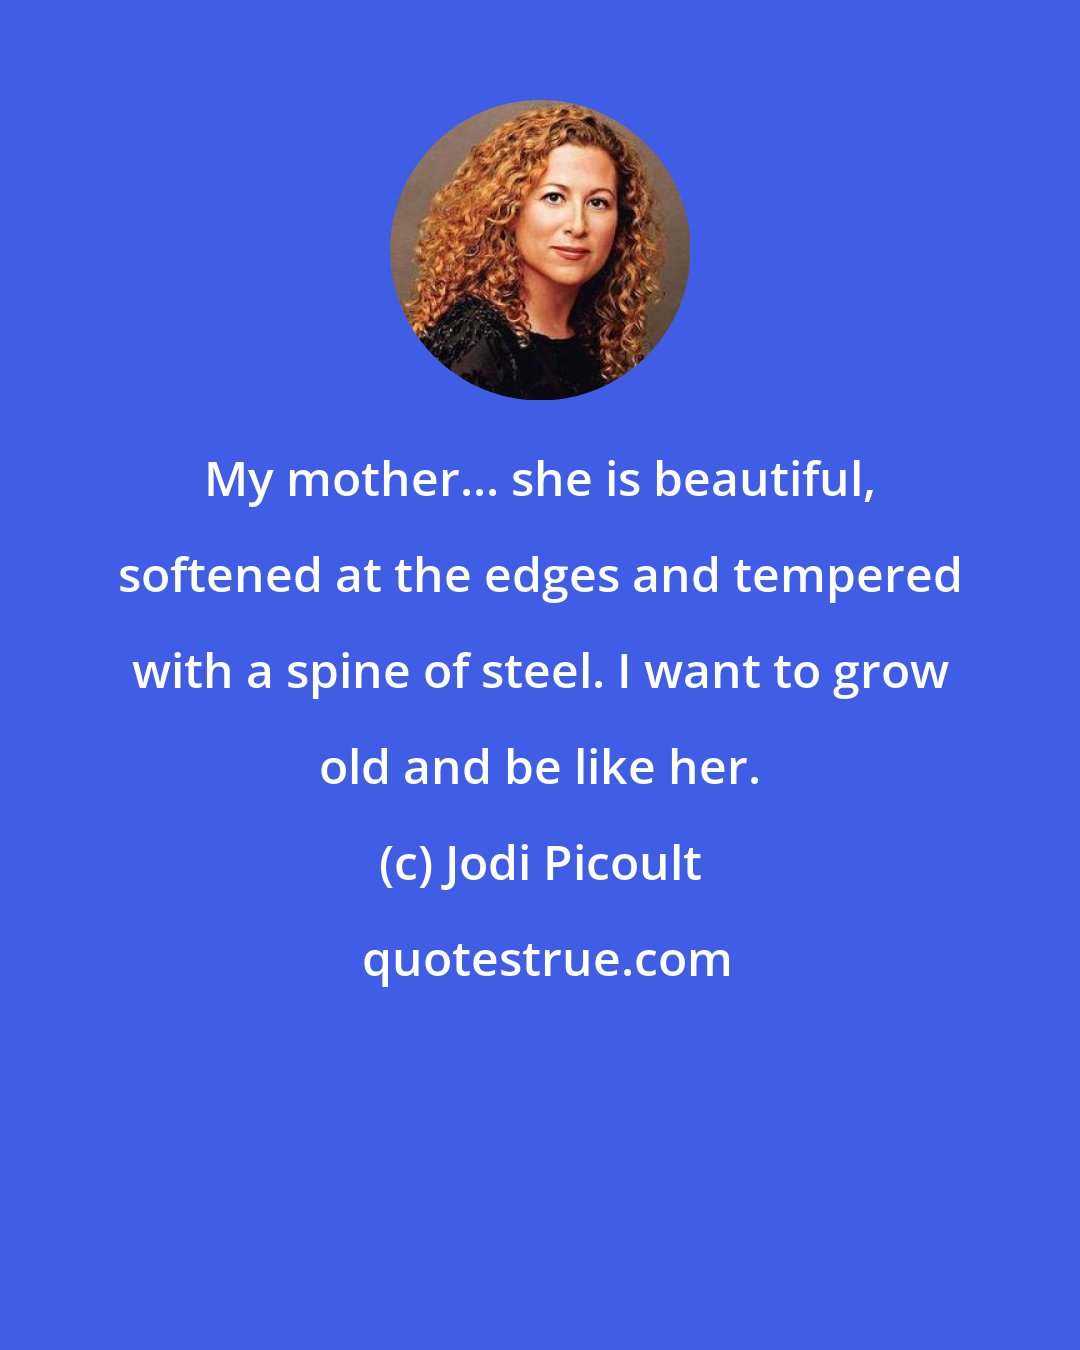 Jodi Picoult: My mother... she is beautiful, softened at the edges and tempered with a spine of steel. I want to grow old and be like her.